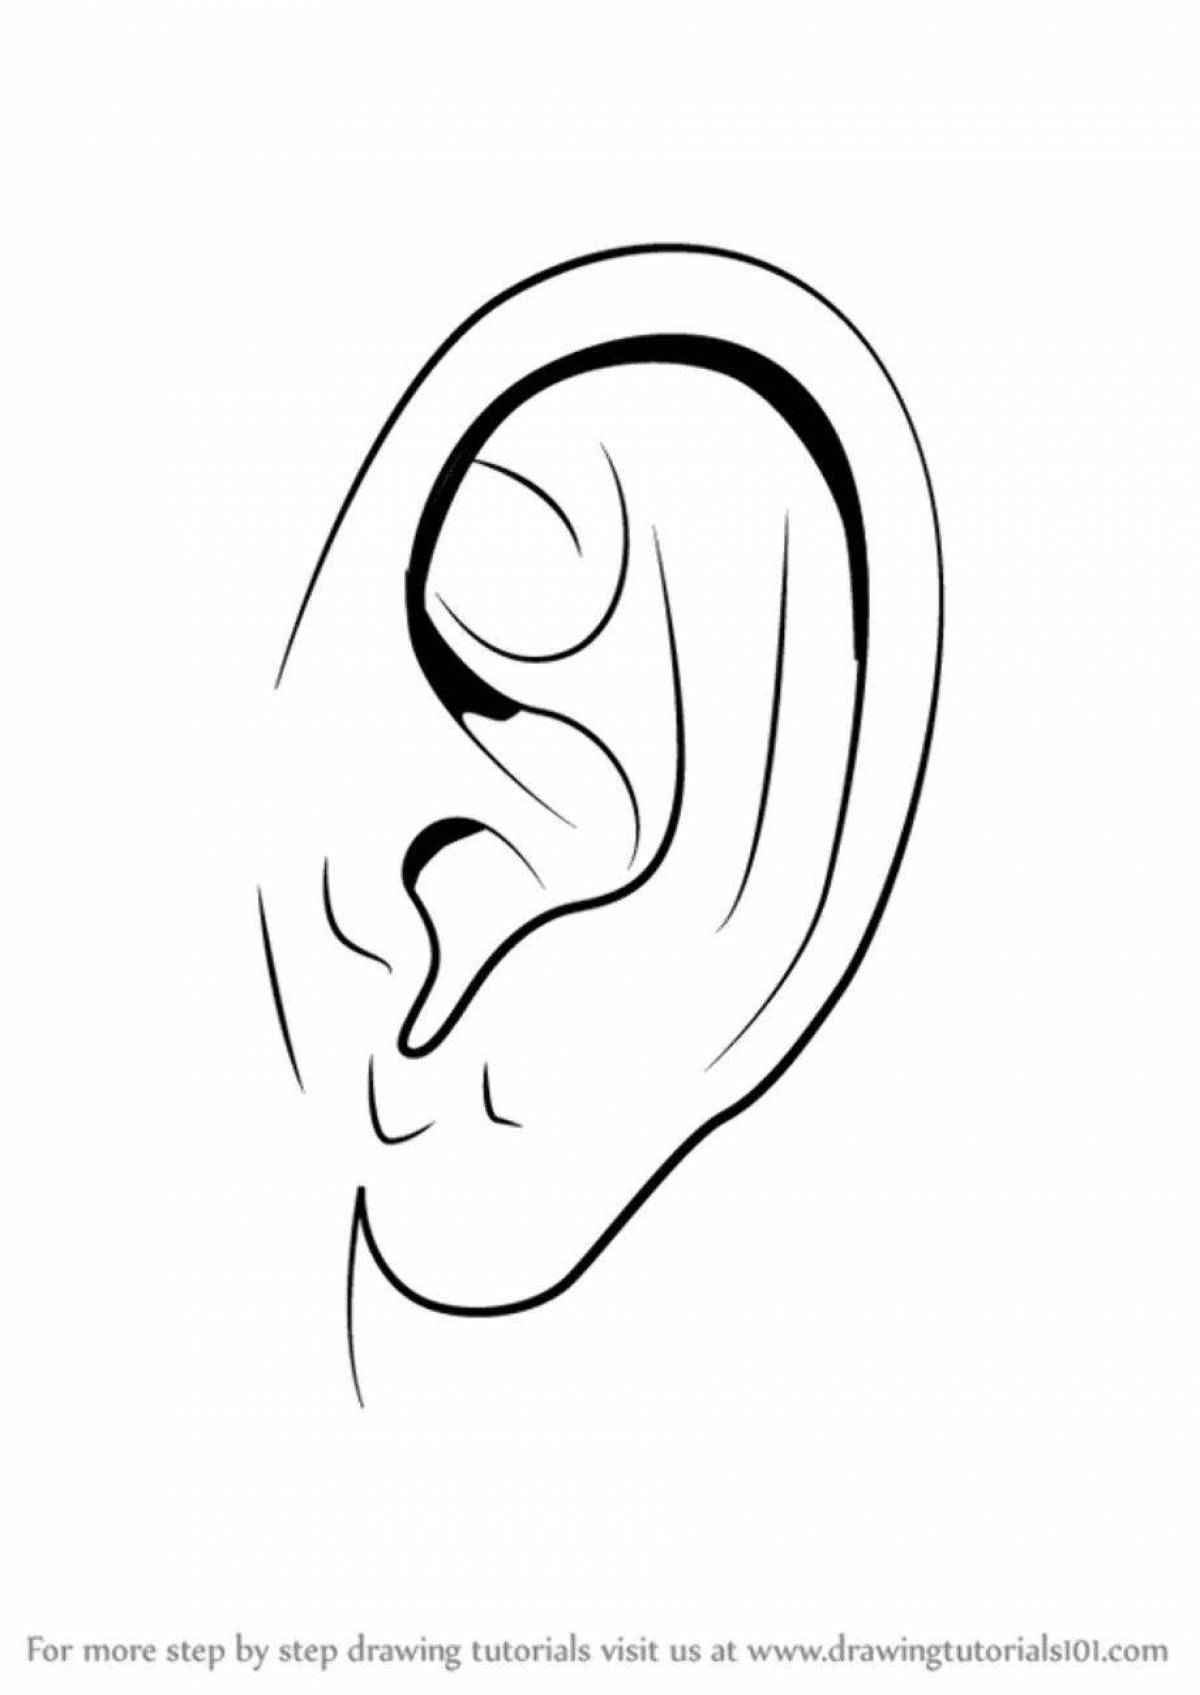 Coloring page of colorful ears for kids